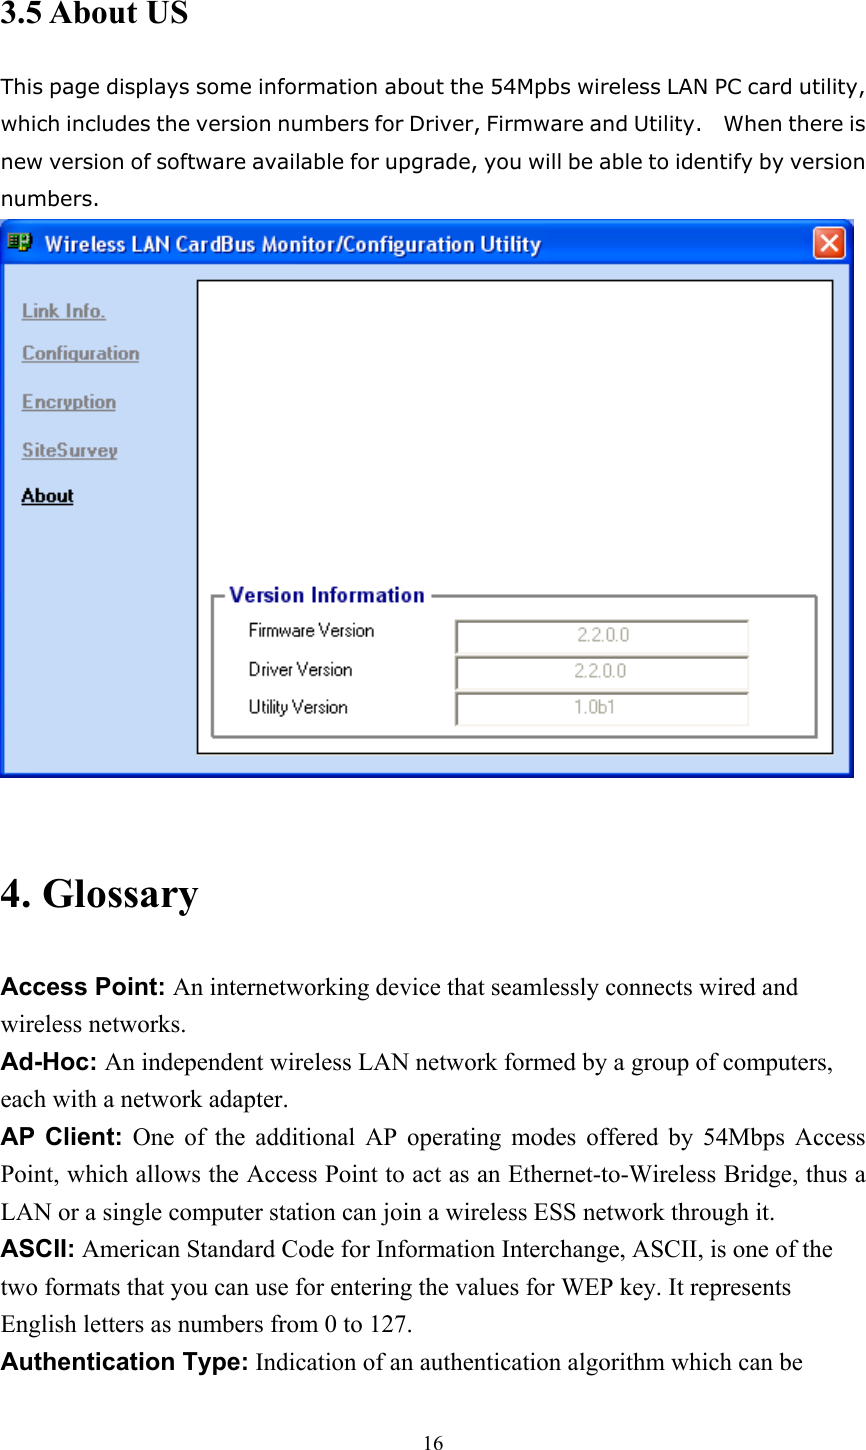 3.5 About US This page displays some information about the 54Mpbs wireless LAN PC card utility, which includes the version numbers for Driver, Firmware and Utility.    When there is new version of software available for upgrade, you will be able to identify by version numbers.   4. Glossary Access Point: An internetworking device that seamlessly connects wired and wireless networks. Ad-Hoc: An independent wireless LAN network formed by a group of computers, each with a network adapter. AP Client: One of the additional AP operating modes offered by 54Mbps Access Point, which allows the Access Point to act as an Ethernet-to-Wireless Bridge, thus a LAN or a single computer station can join a wireless ESS network through it. ASCII: American Standard Code for Information Interchange, ASCII, is one of the two formats that you can use for entering the values for WEP key. It represents English letters as numbers from 0 to 127. Authentication Type: Indication of an authentication algorithm which can be  16